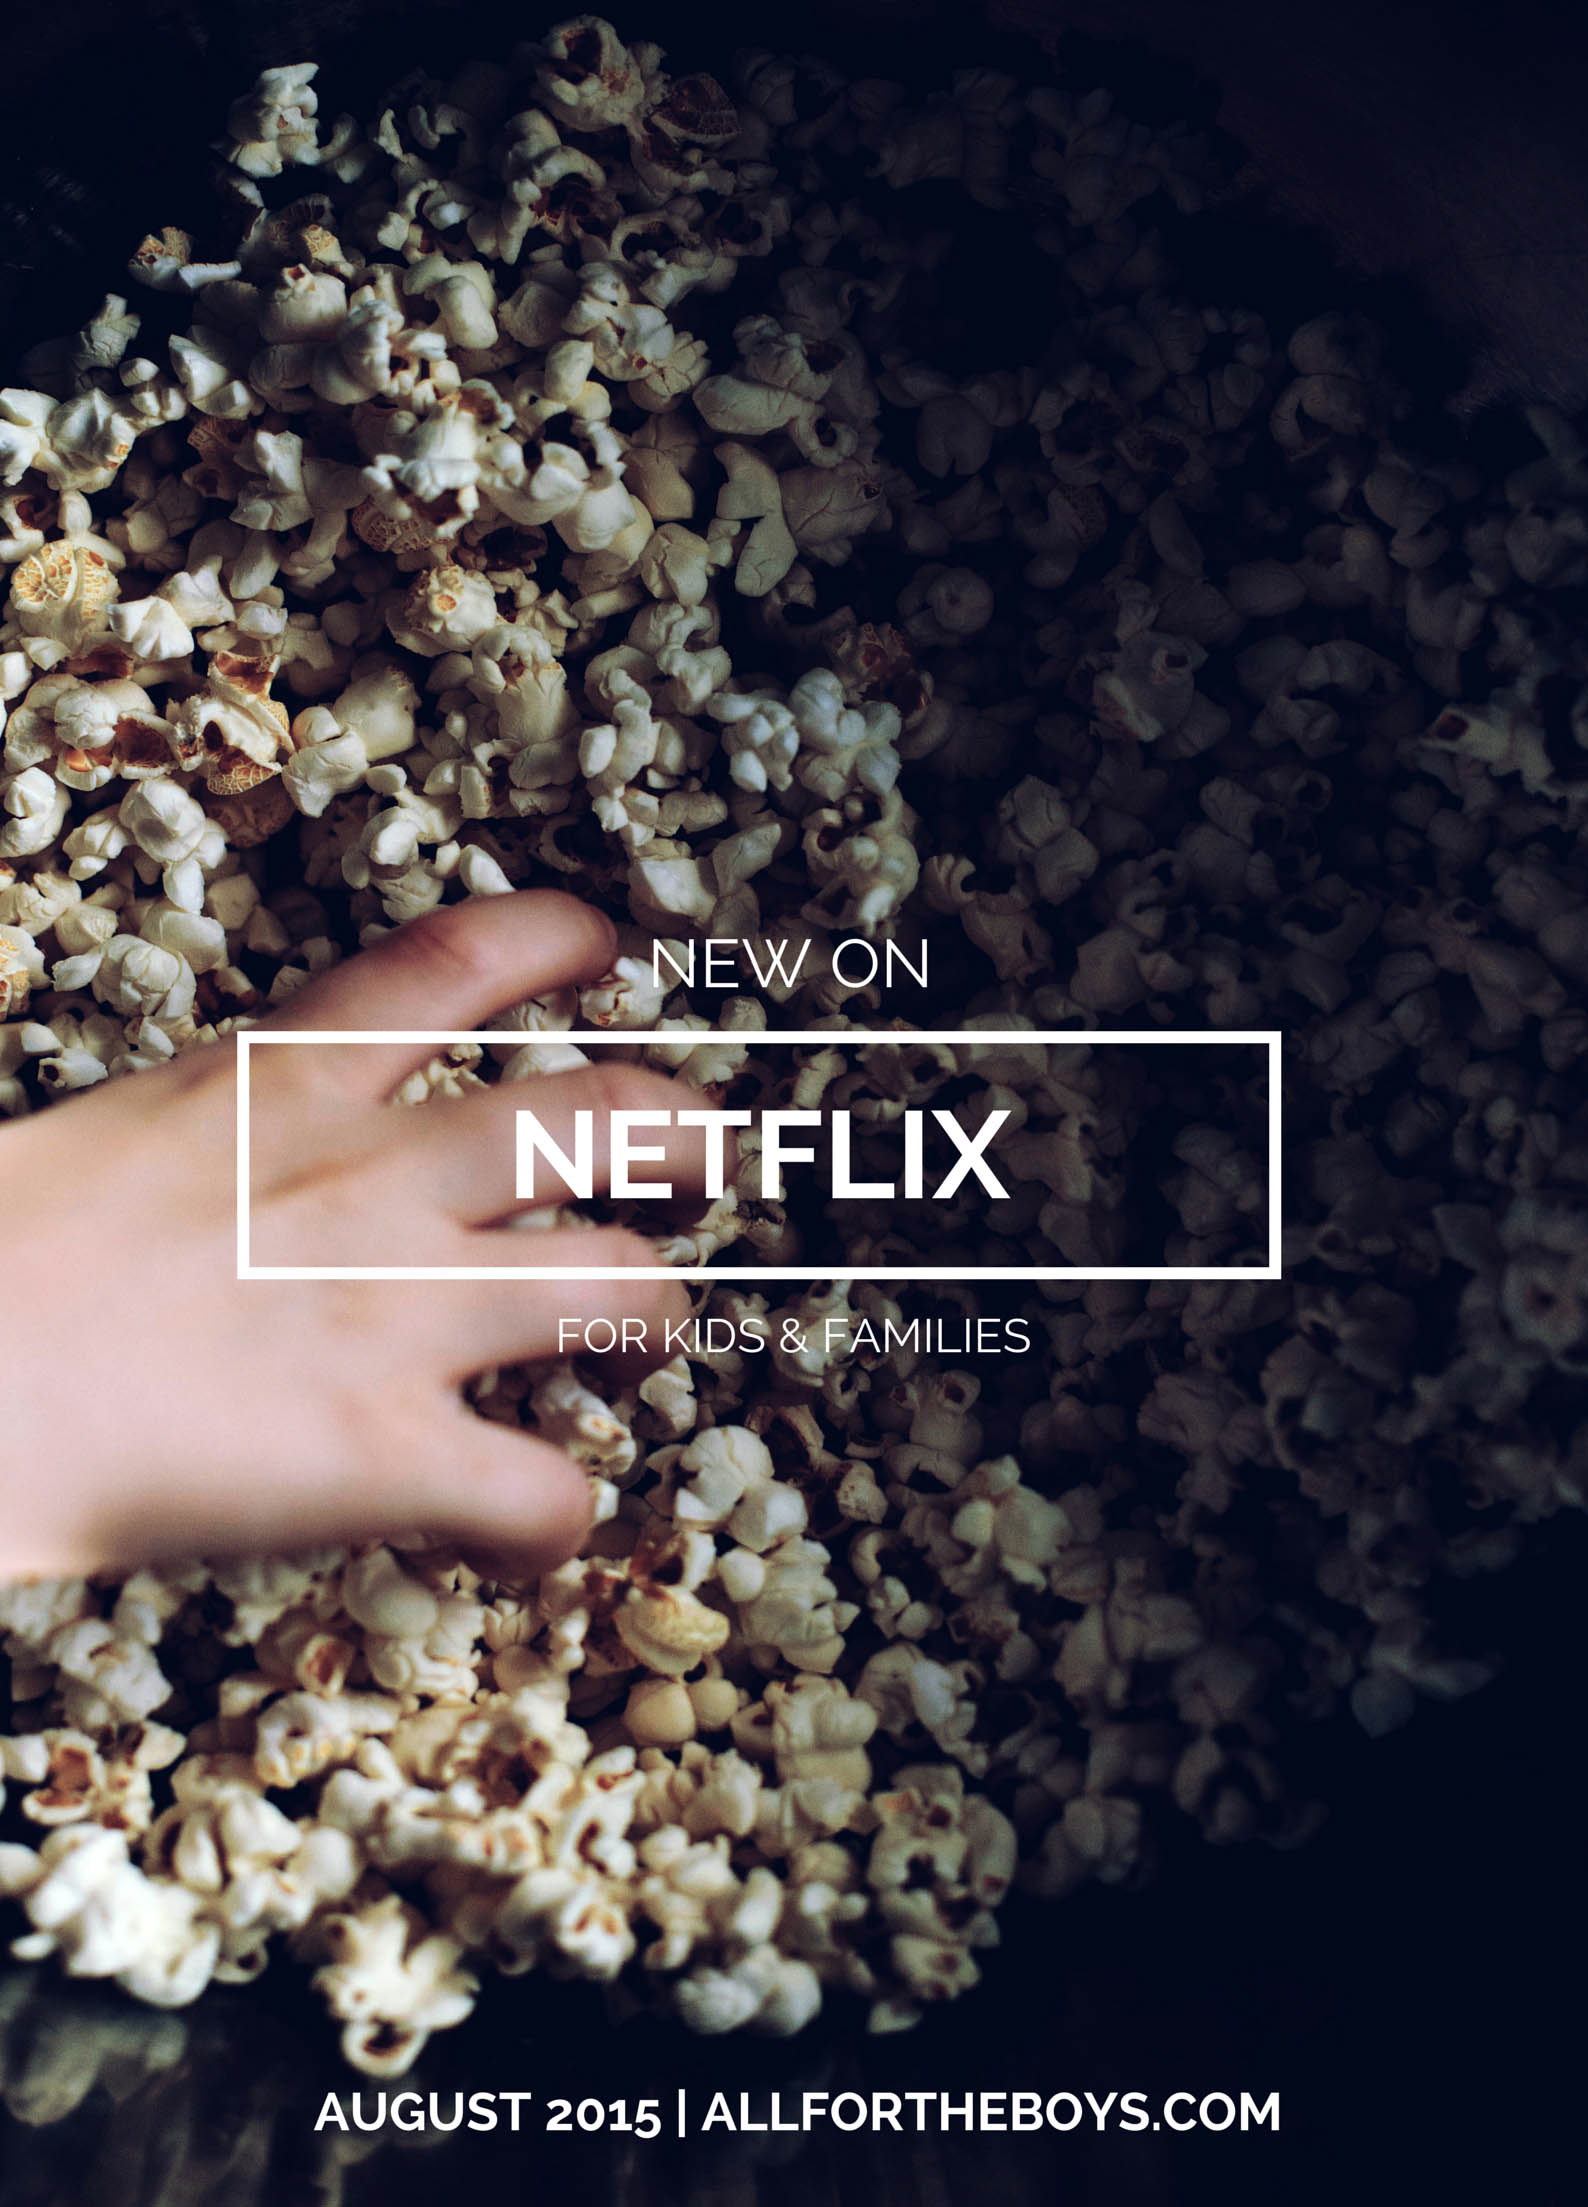 New on Netflix for kids and families for August 2015 (also what to watch before it leaves)